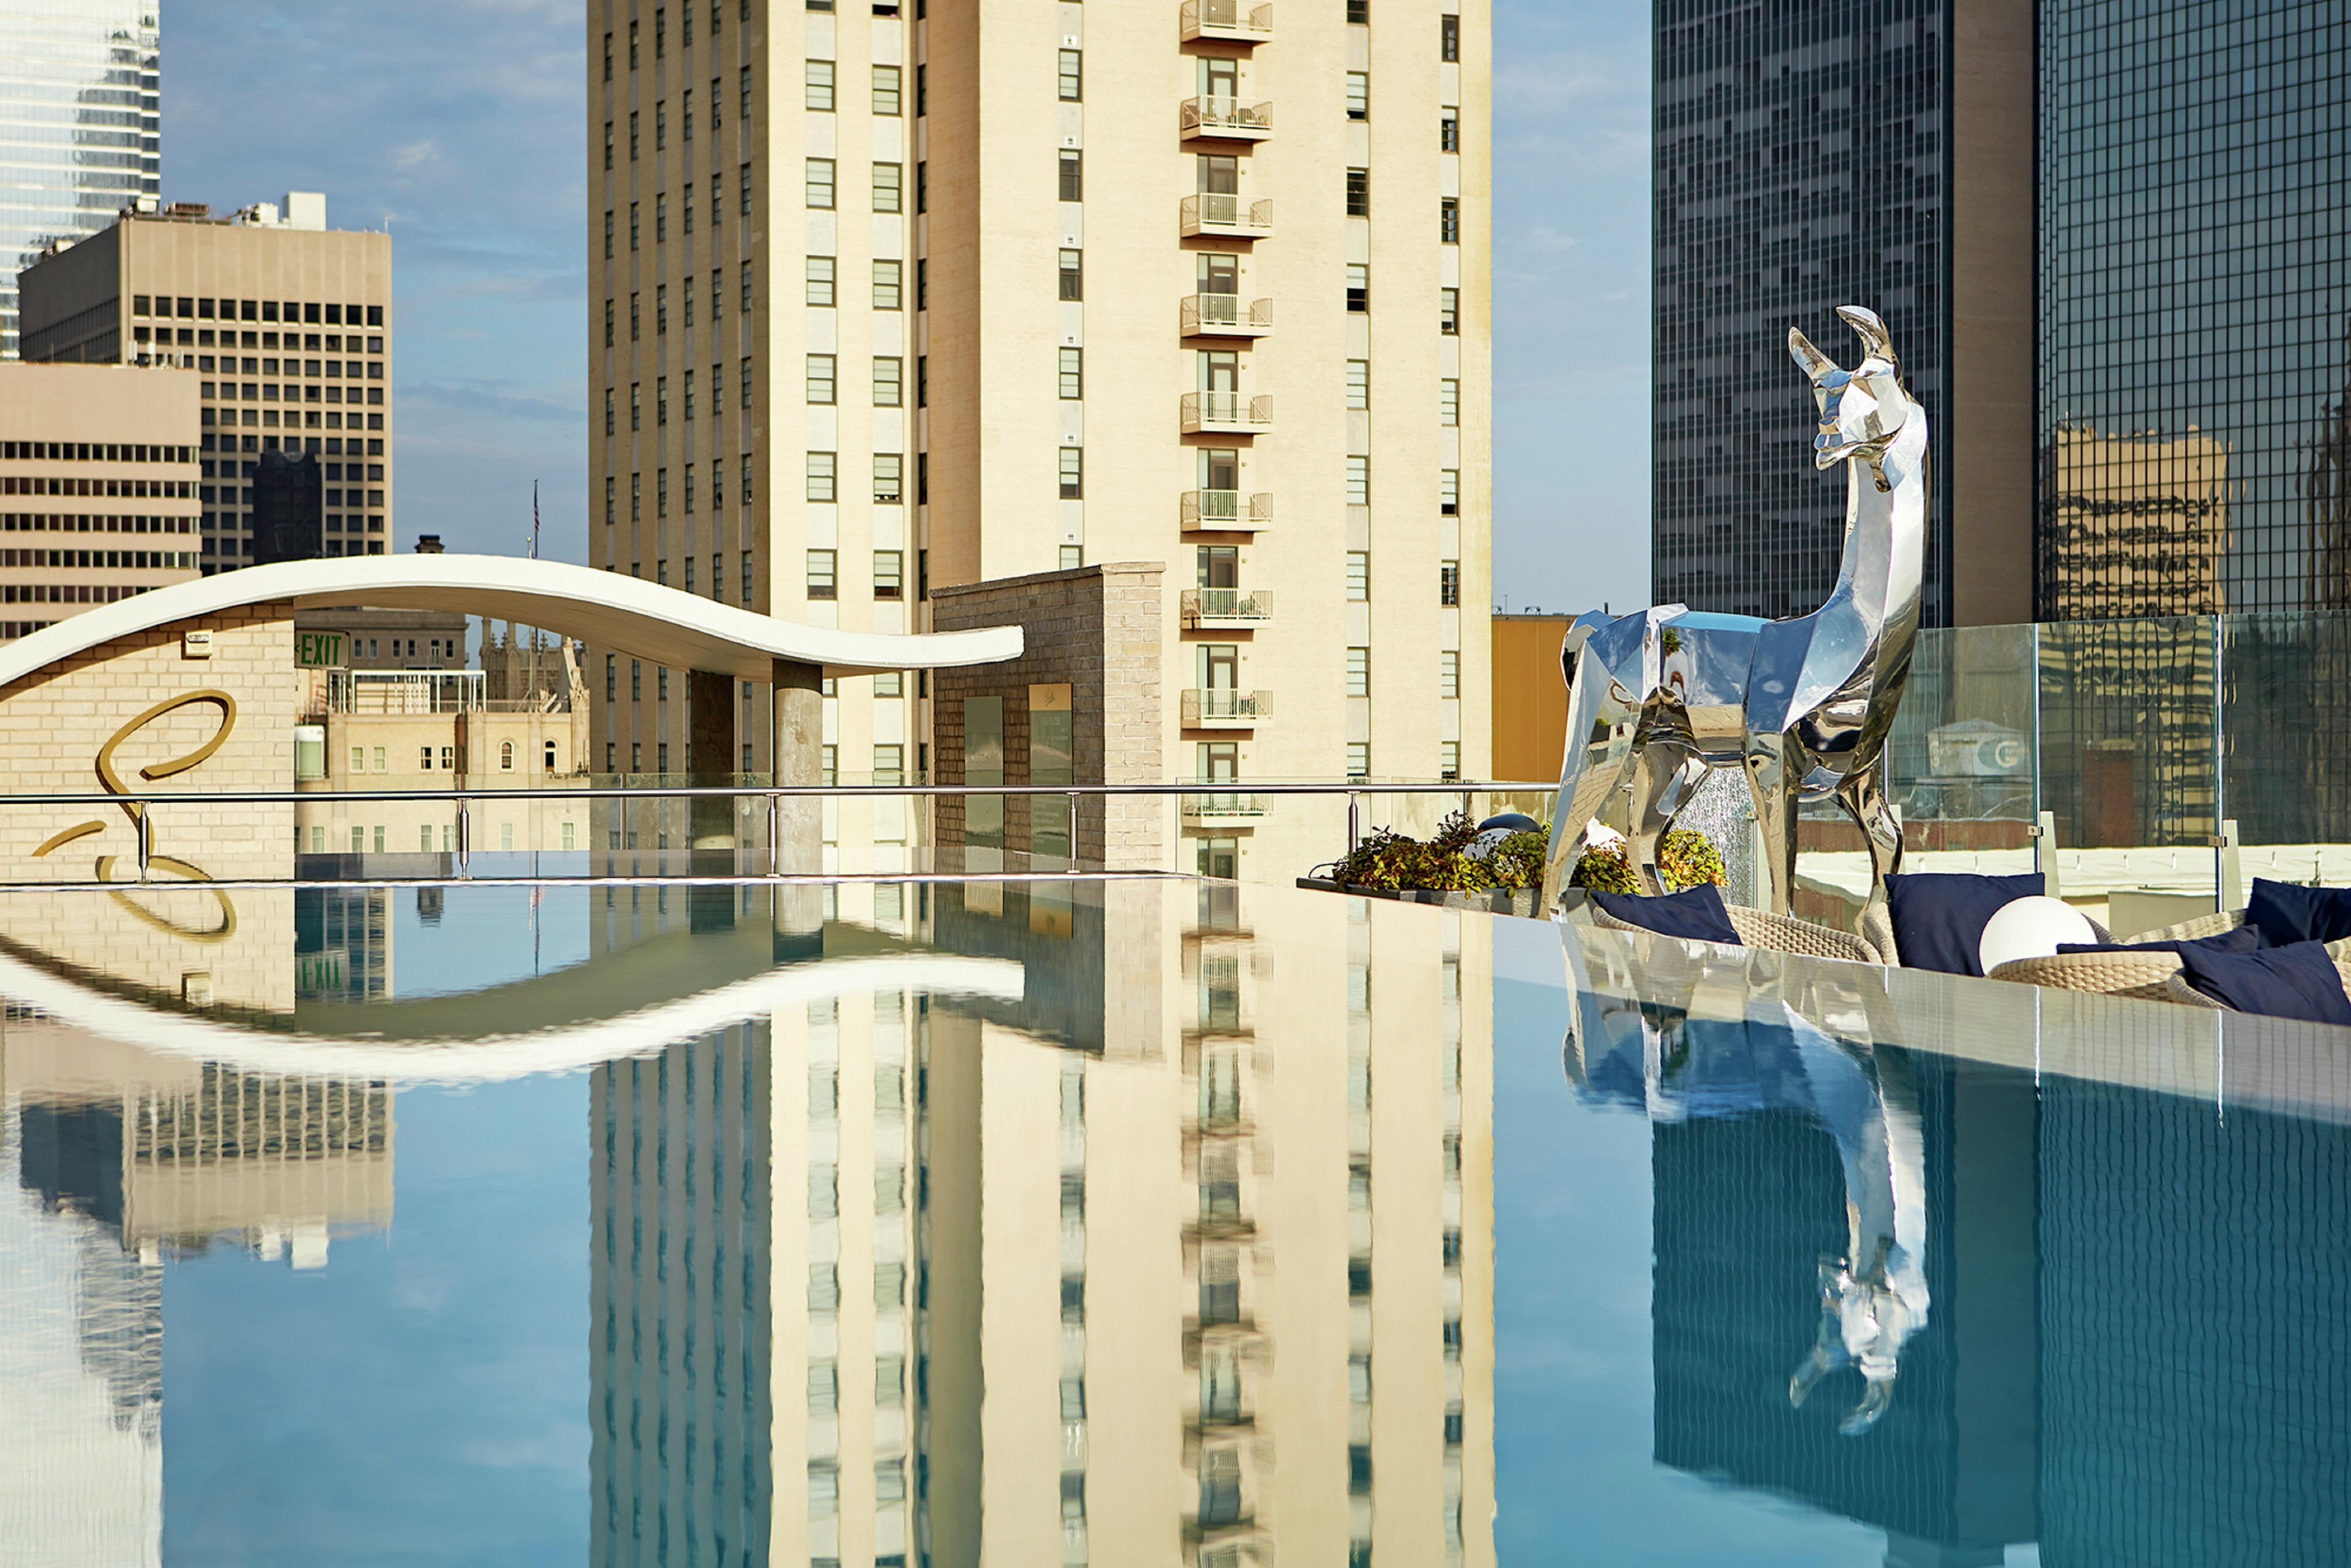 Llama Sculpture Next to Rooftop Pool